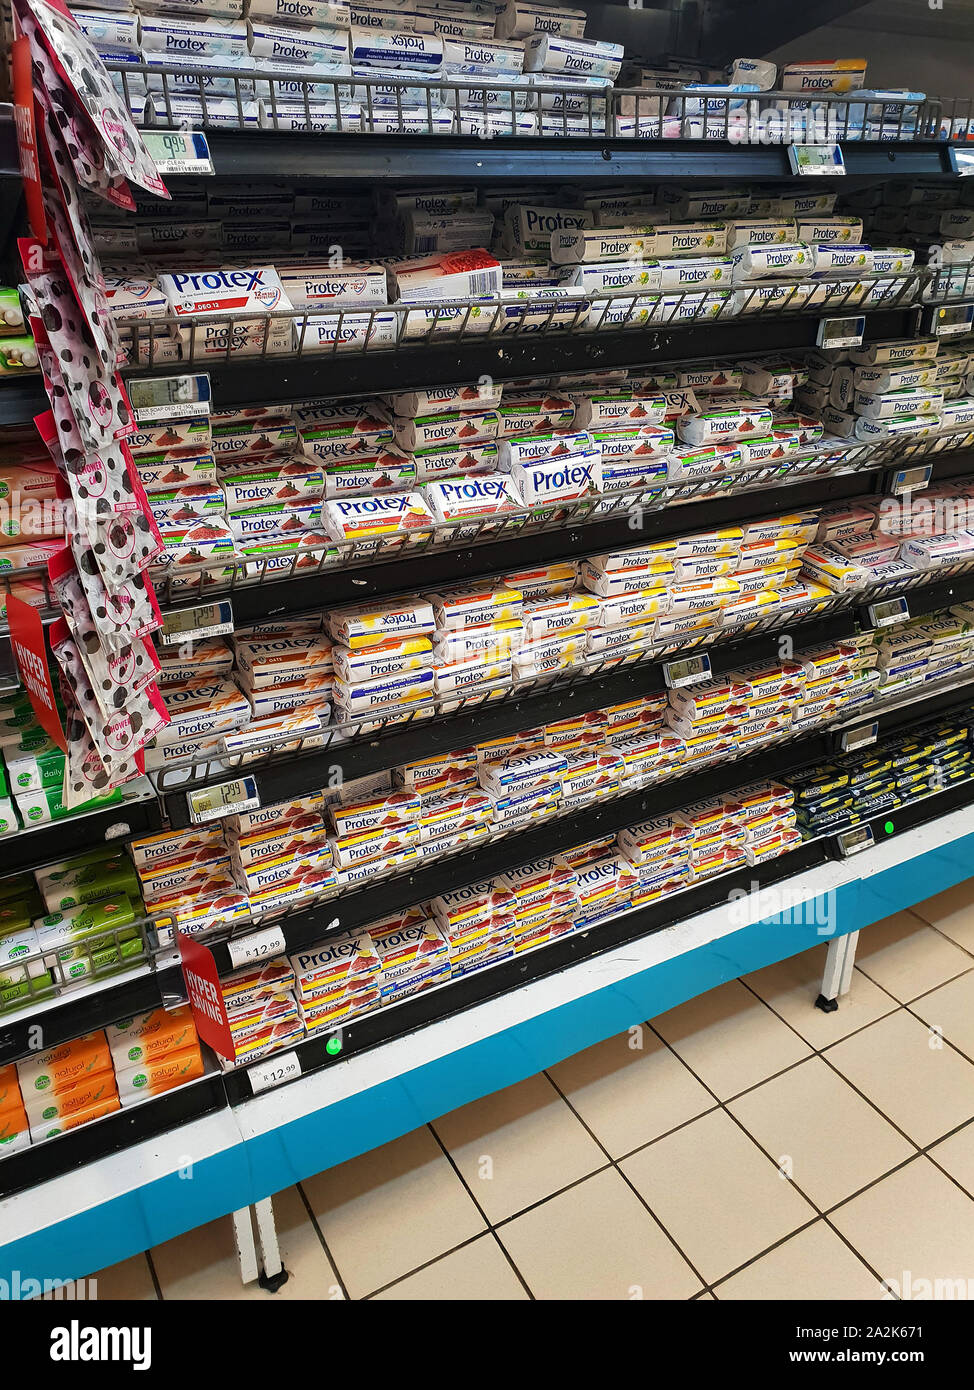 Soap aisle in a Pick n Pay supermarket, South Africa Stock Photo